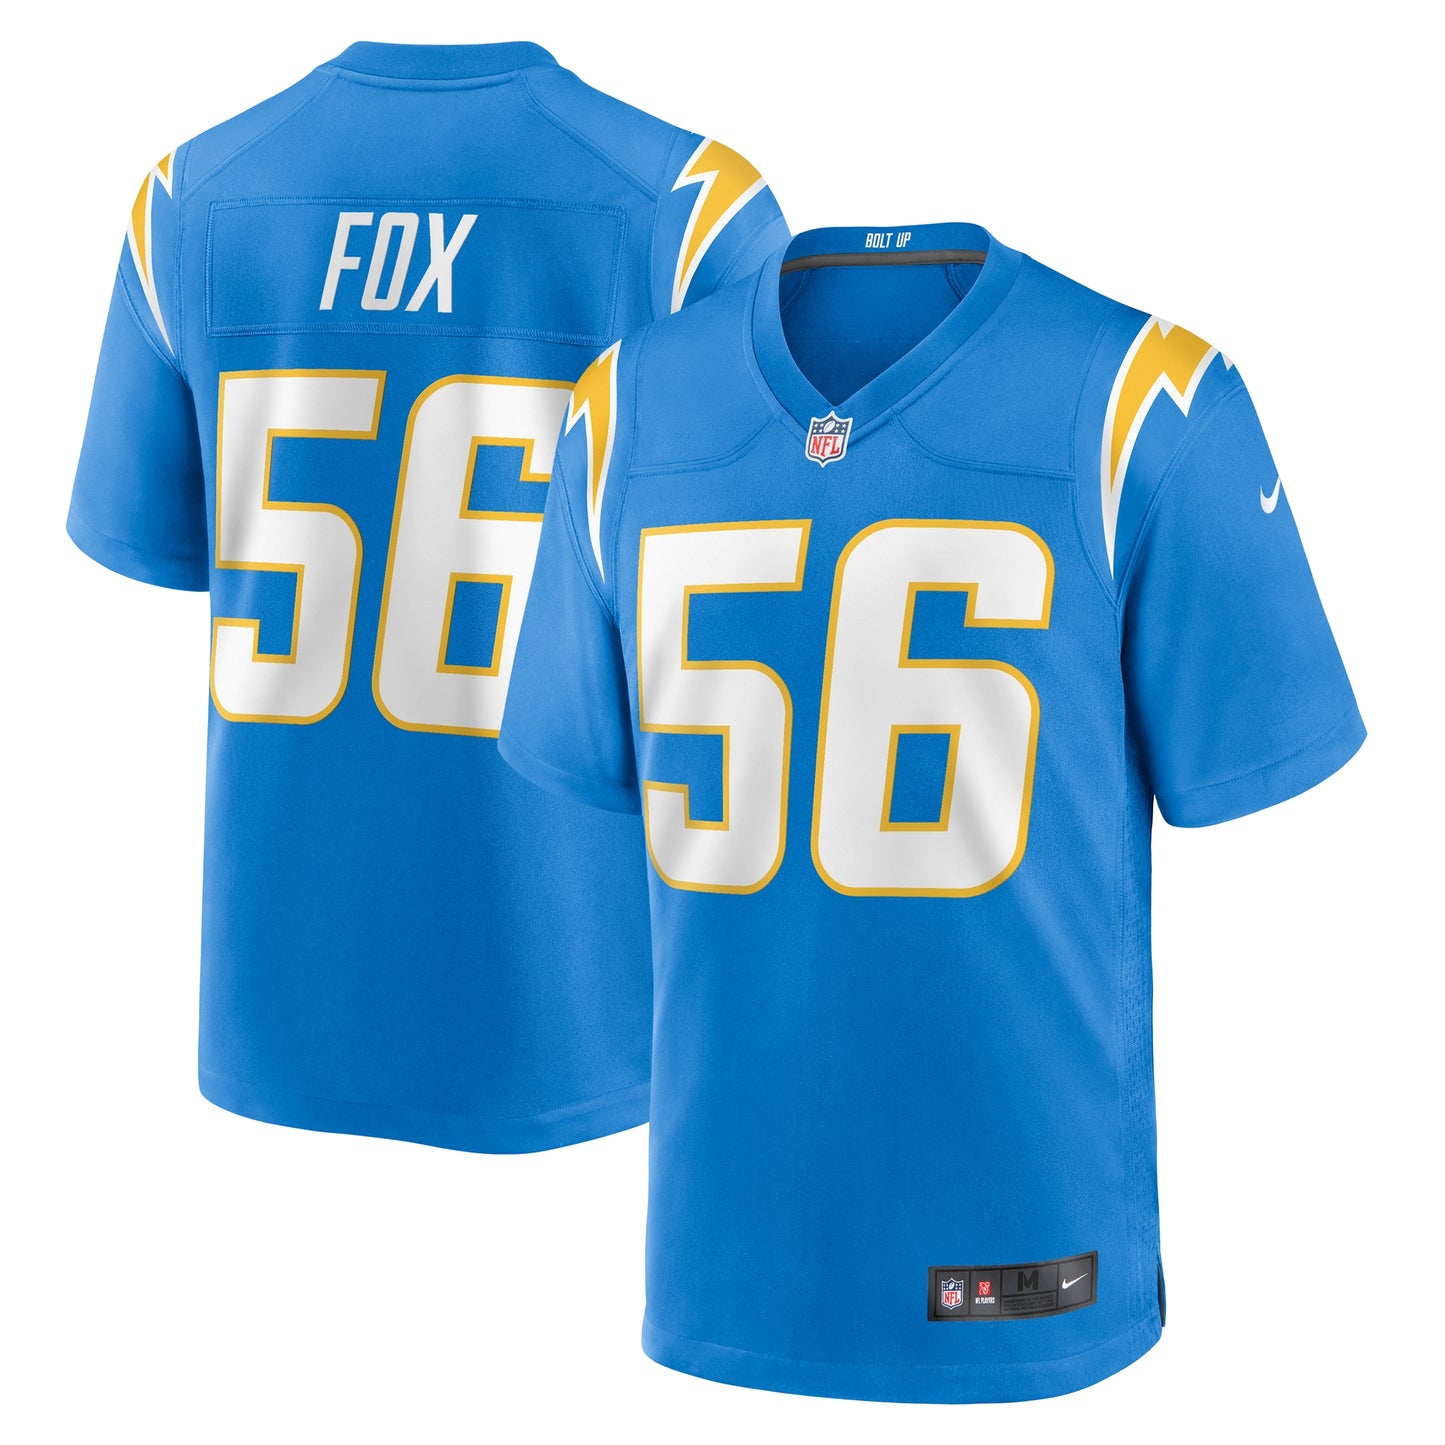 Morgan Fox Los Angeles Chargers Nike Player Game Jersey - Powder Blue